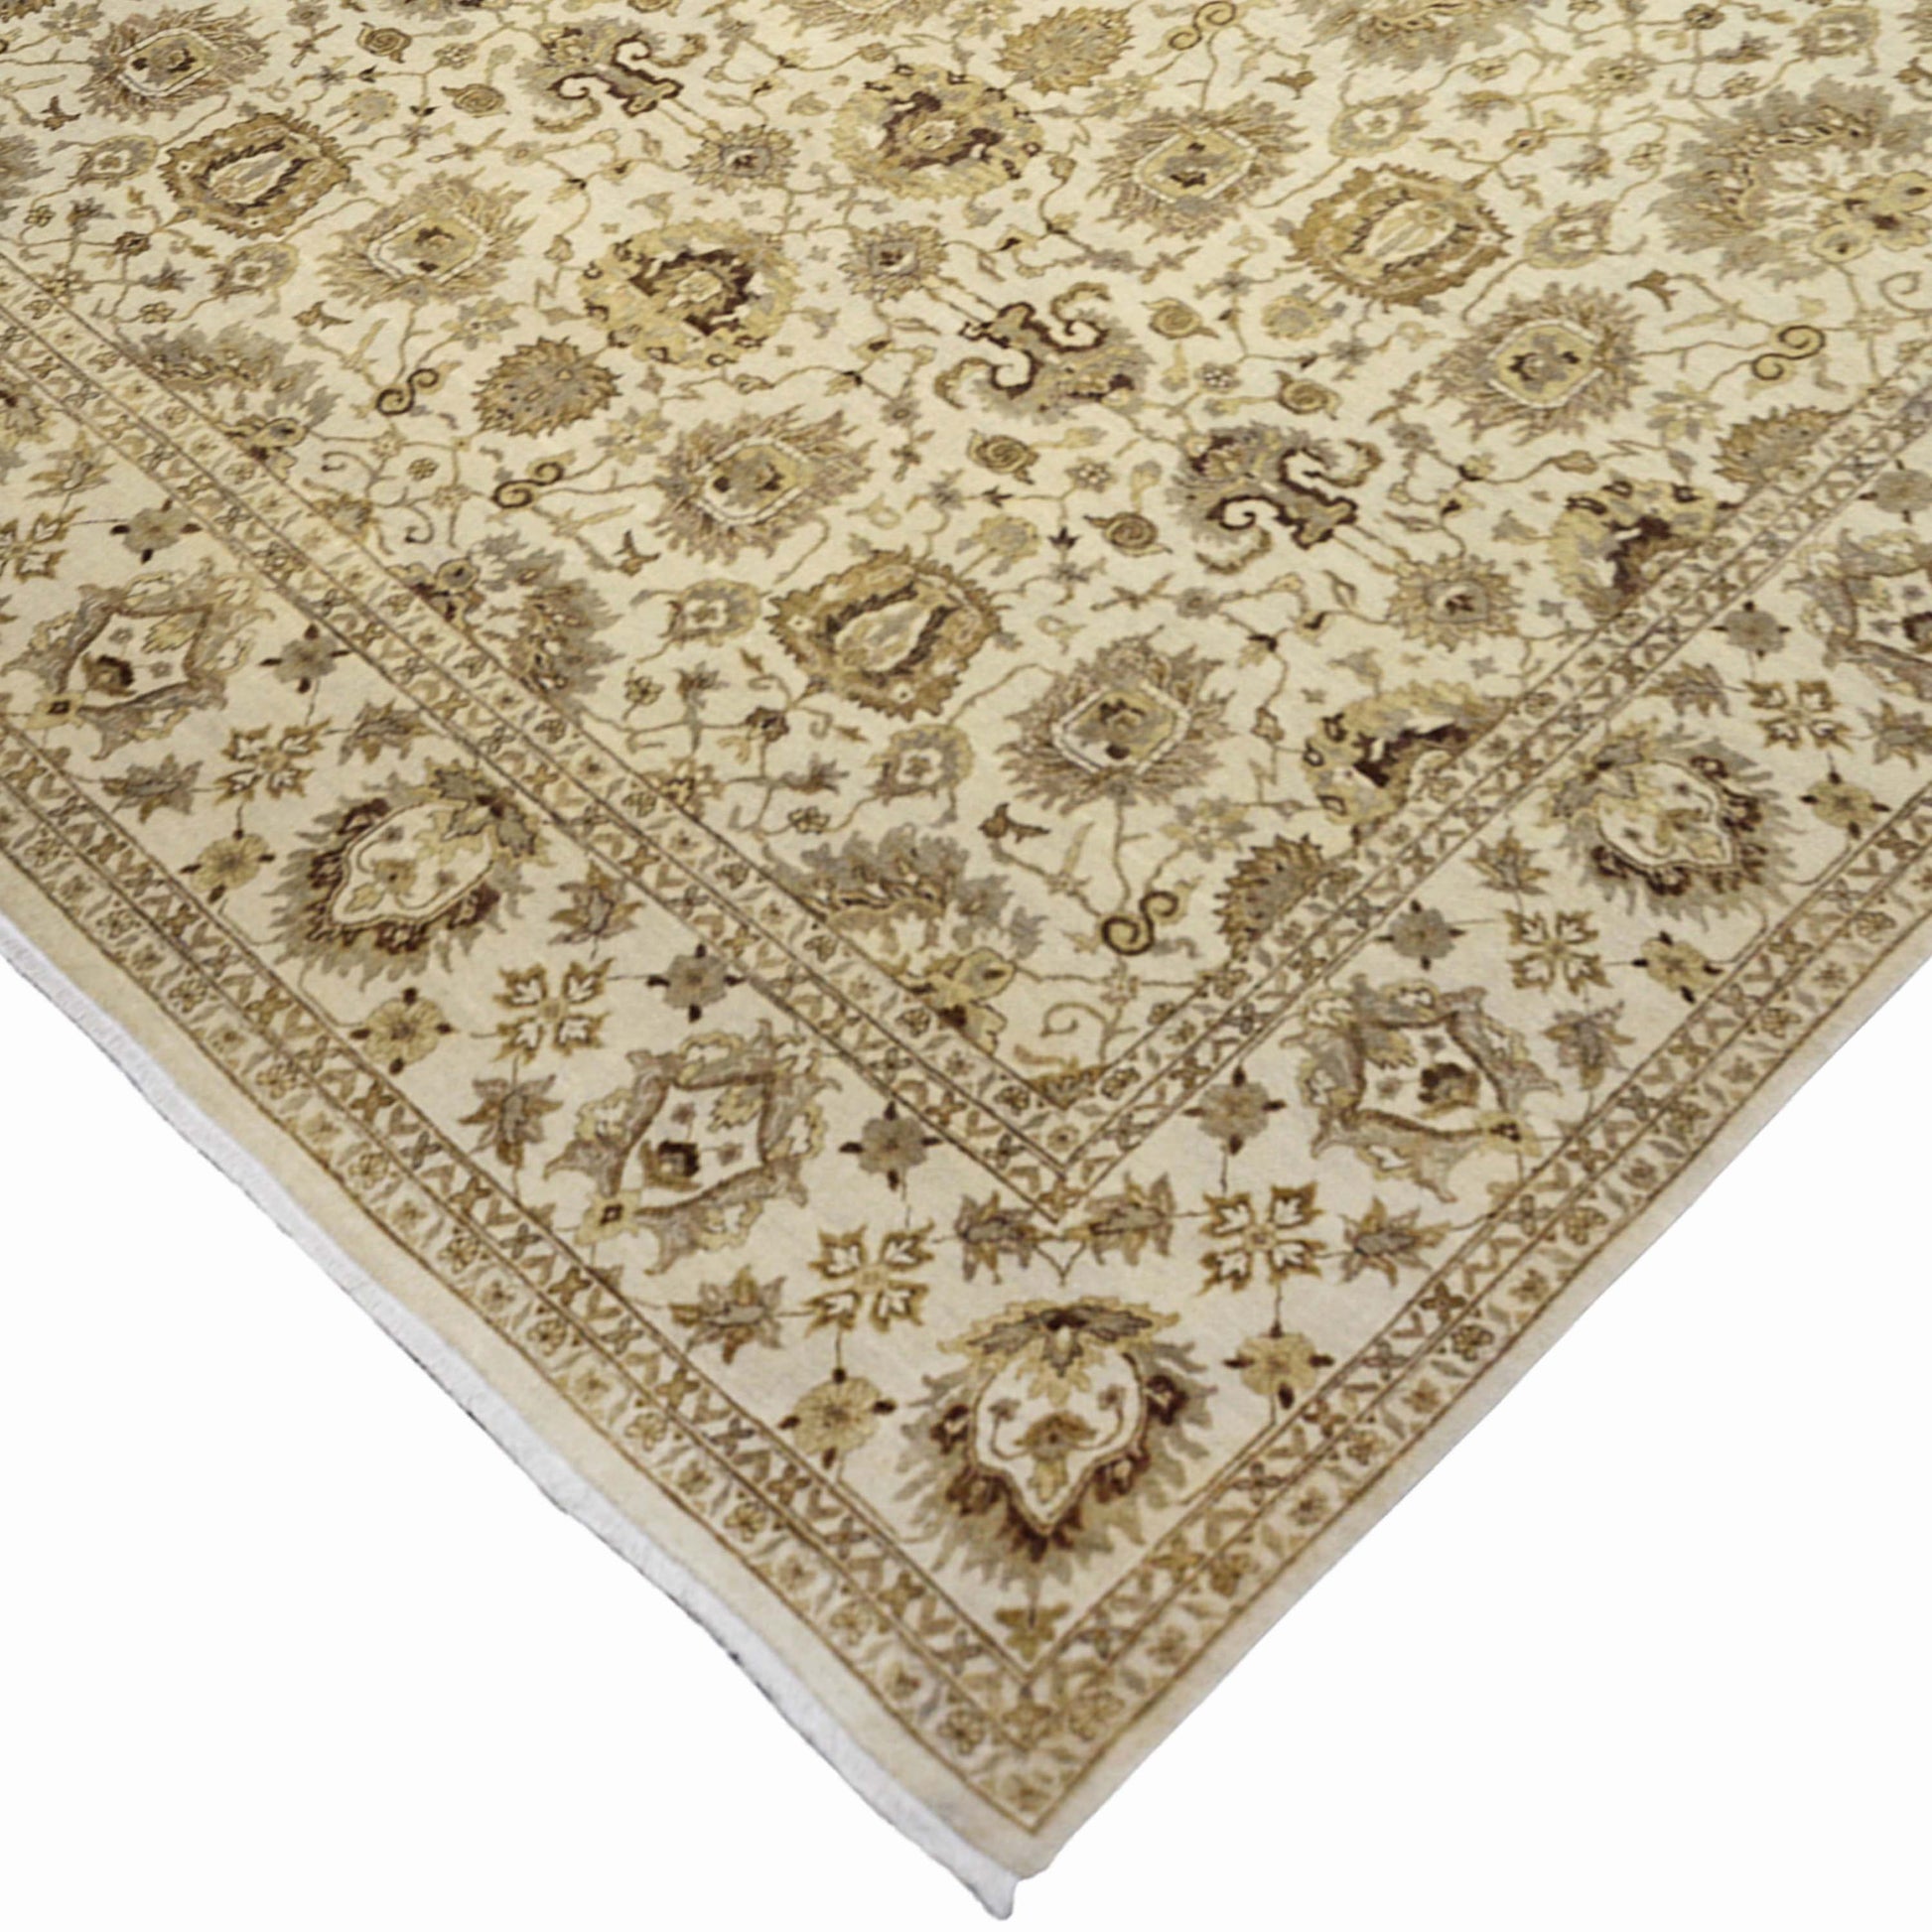 Get trendy with Mughal Beige, Brown and Brown Traditional Ushak Pure Wool Luxury Handknotted Area Rug - Traditional Rugs available at Jaipur Oriental Rugs. Grab yours for $3299.00 today!